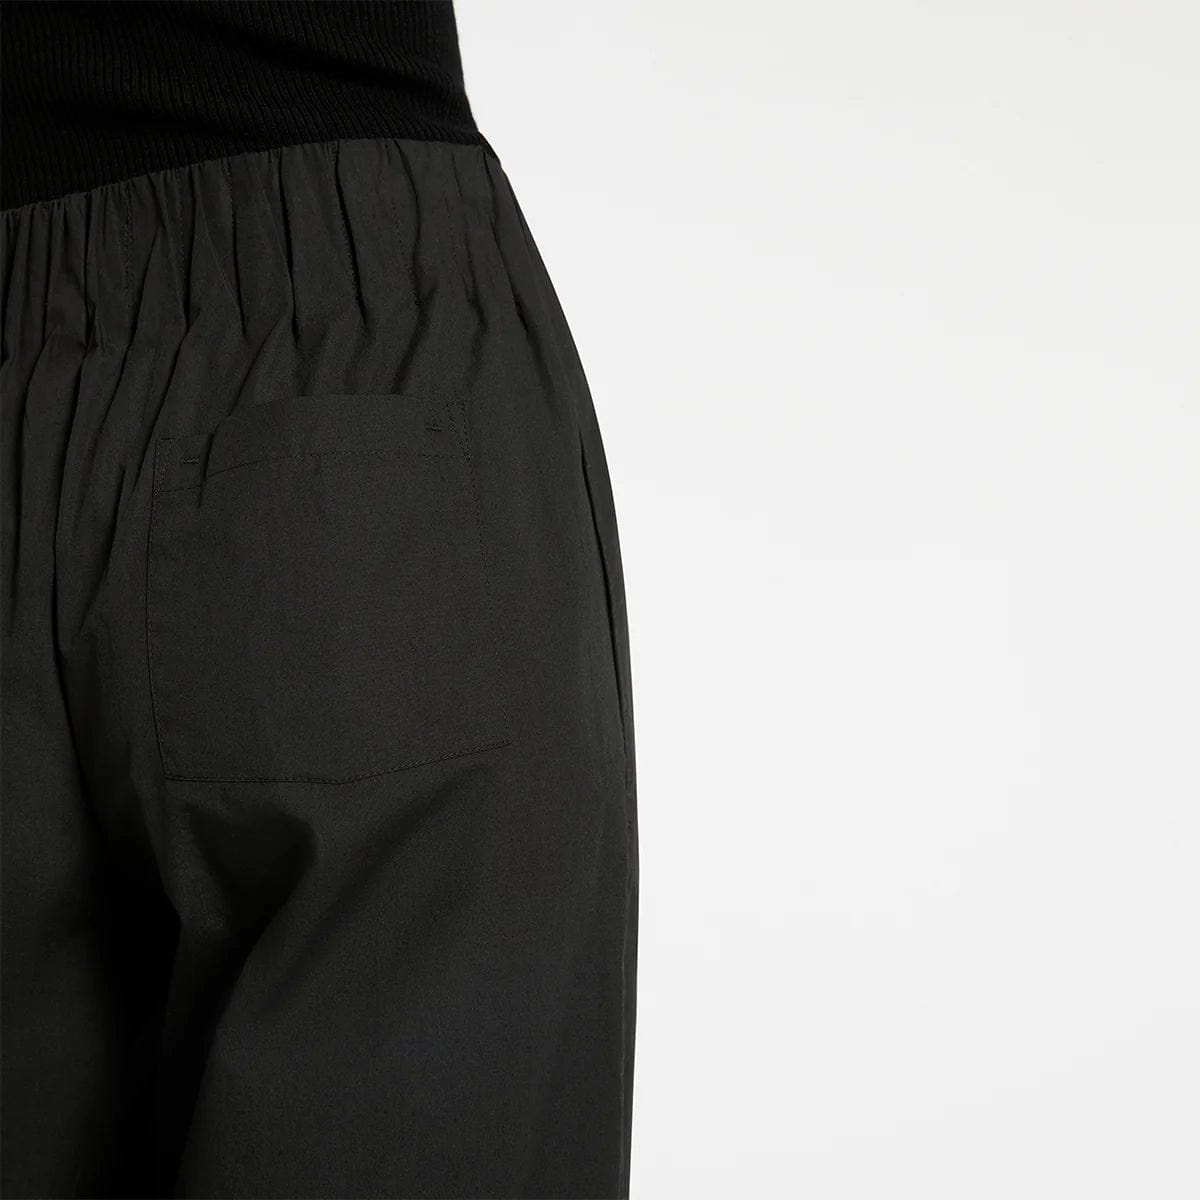 Status Anxiety Pants - Casual Status Anxiety | Frontier Pants - Soft Black